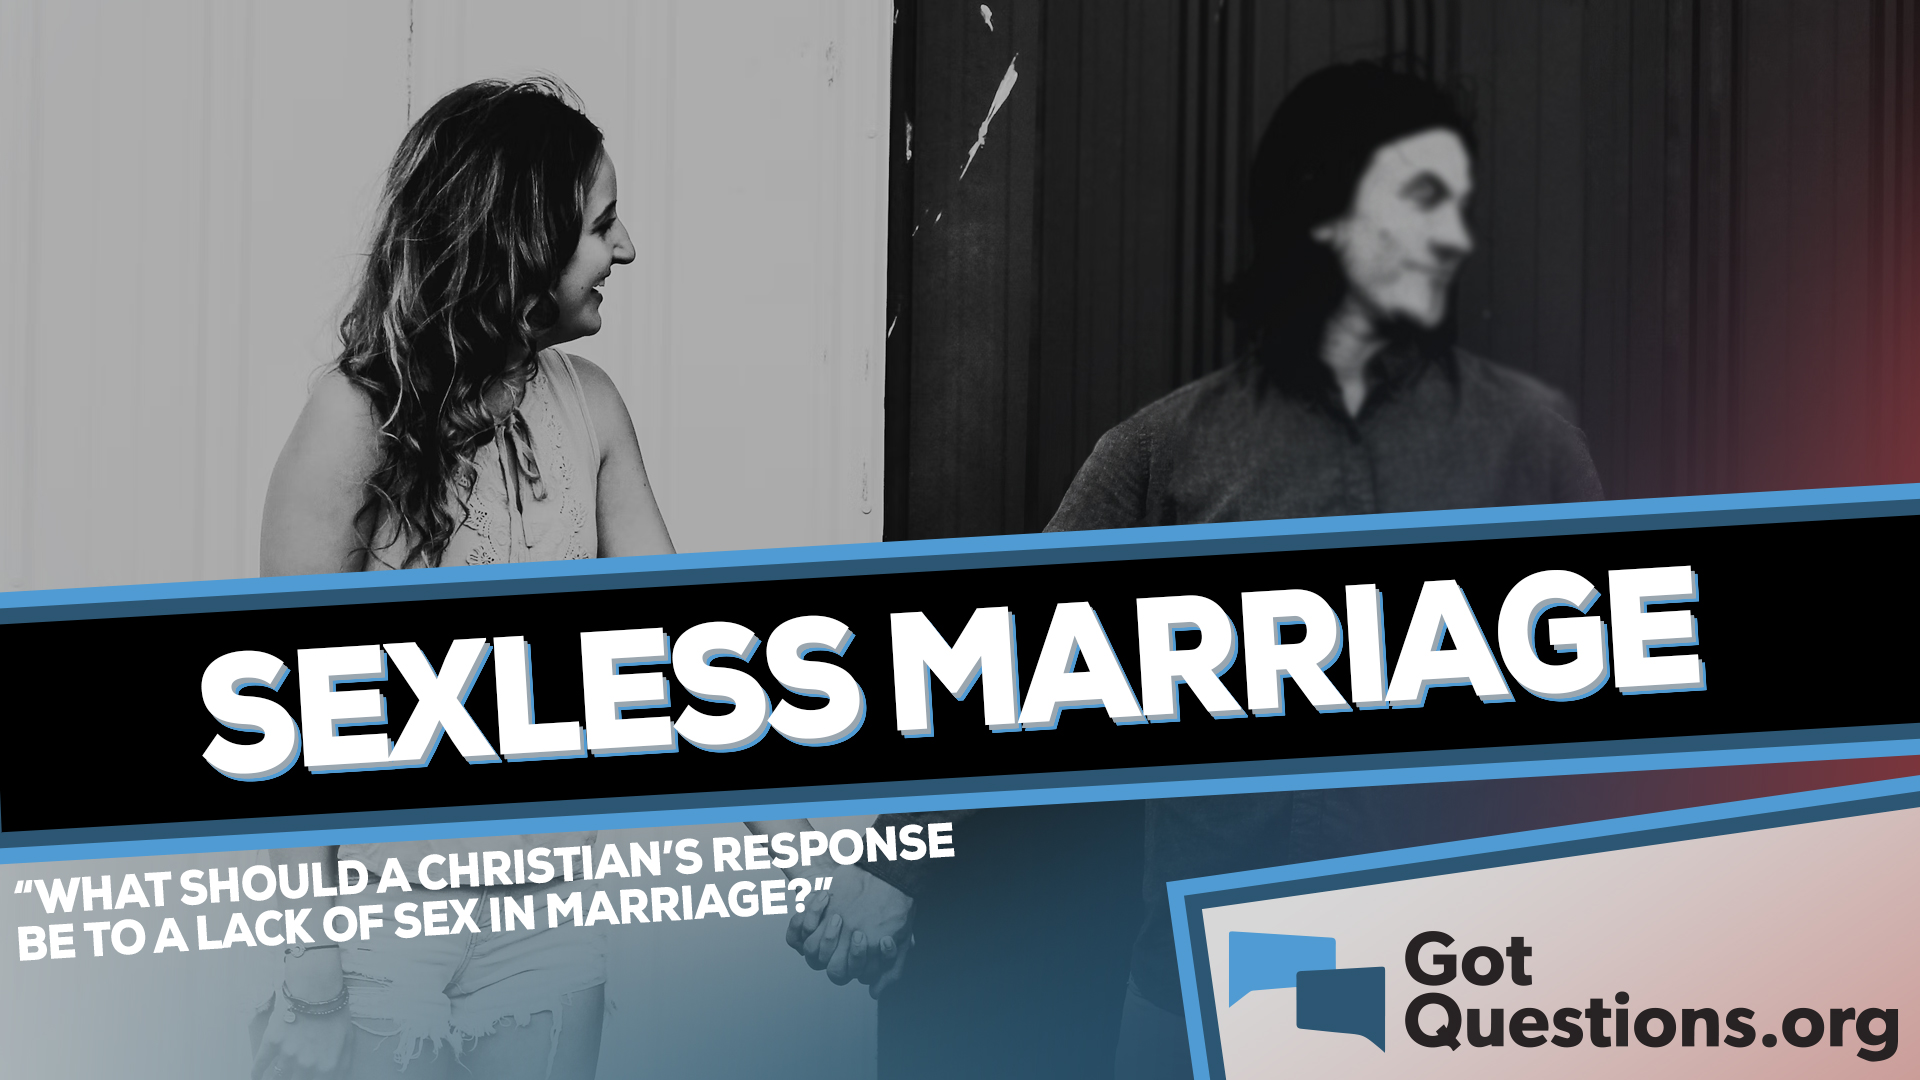 What should be a Christians response to a lack of sex in marriage (a sexless marriage)? GotQuestions